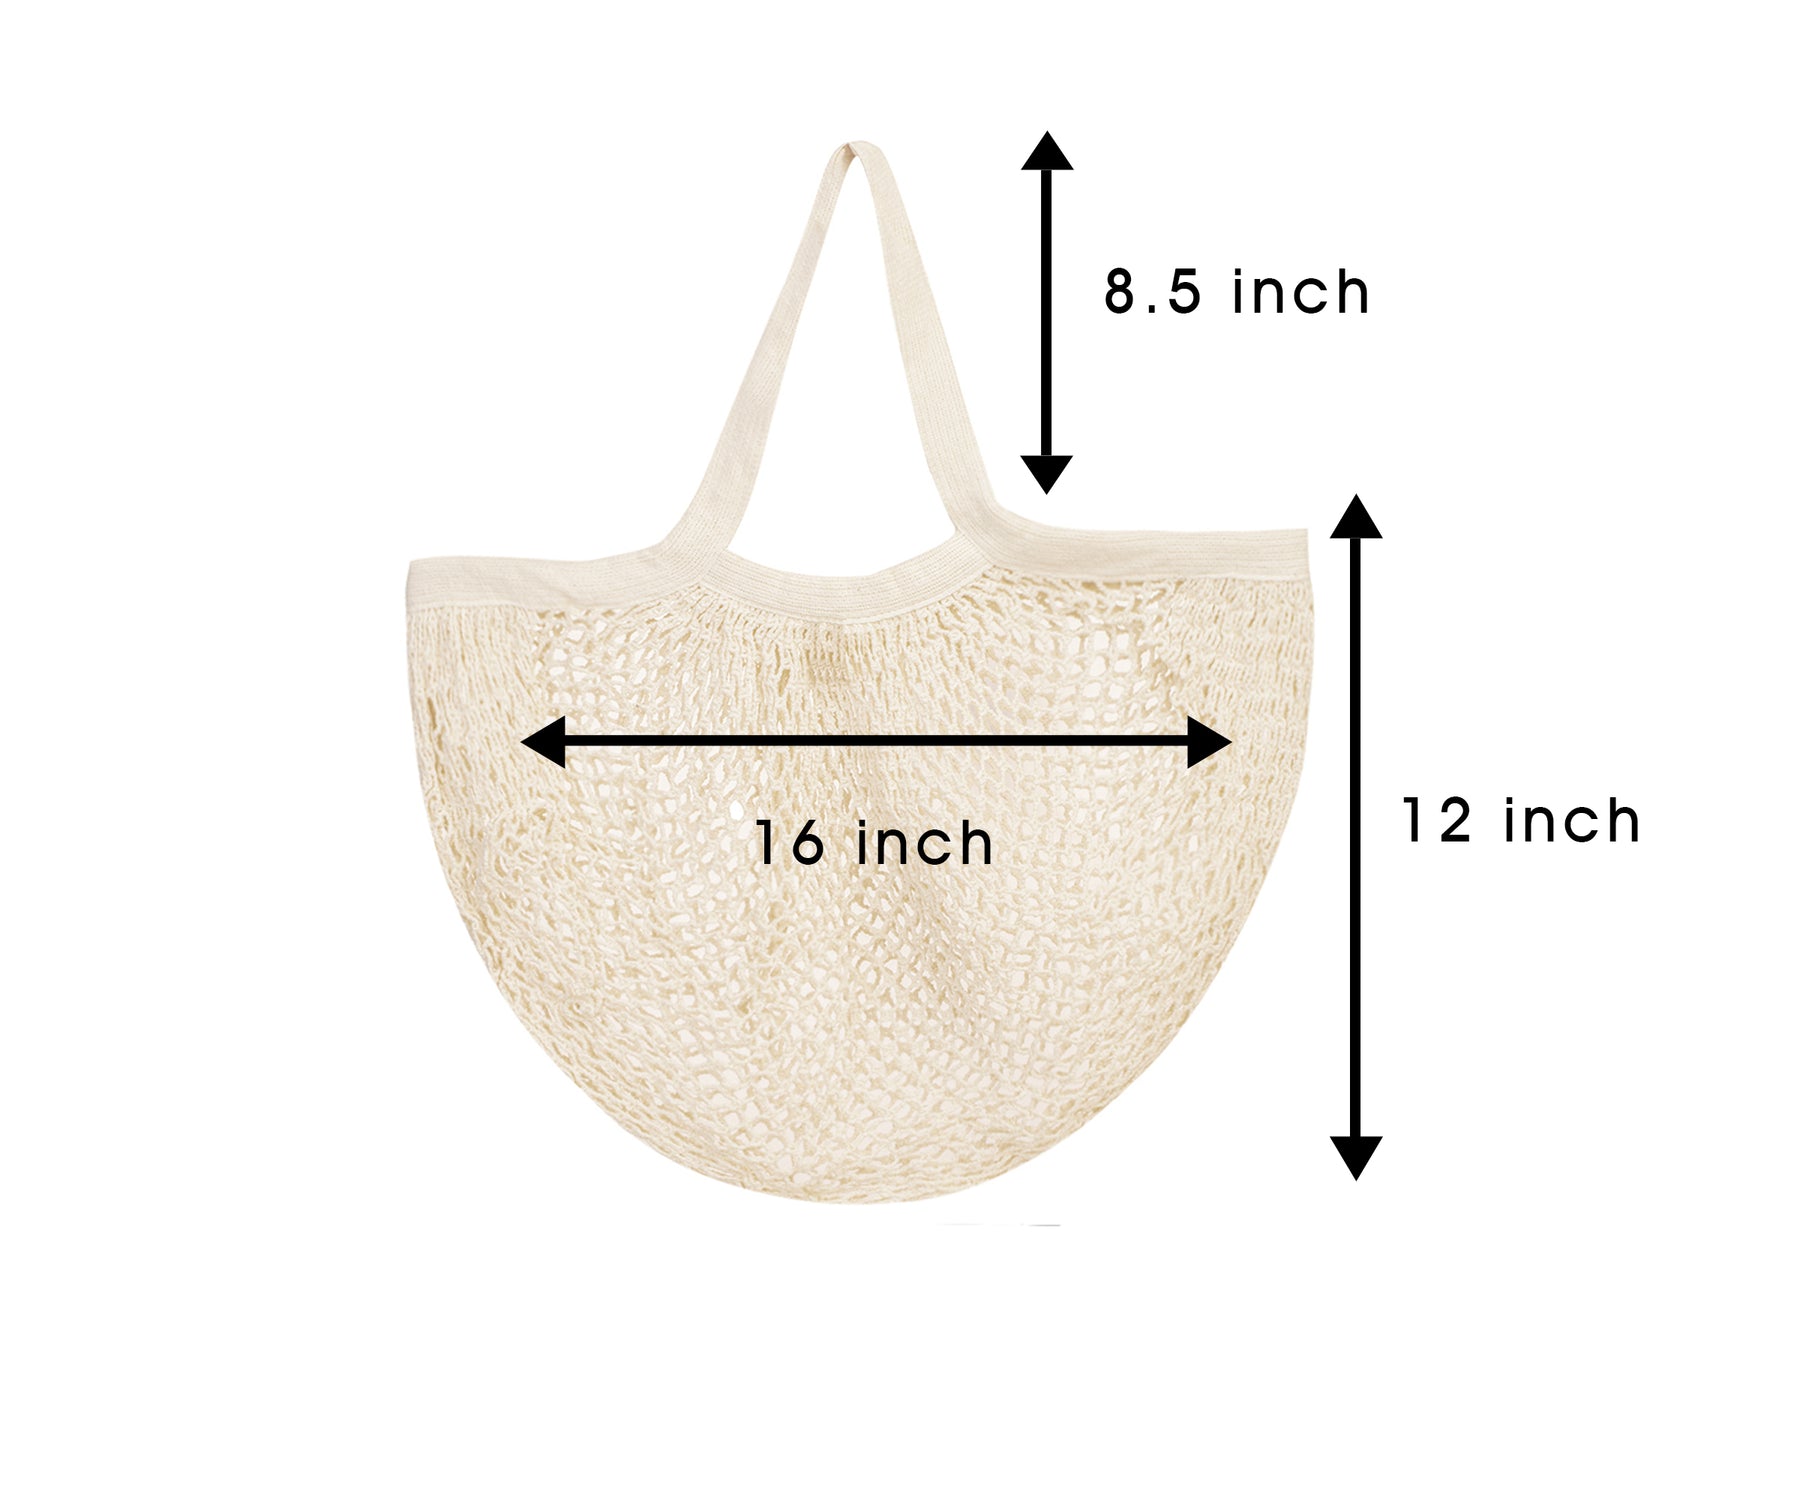 Detailed view of a cotton string bag with a ruler for size reference